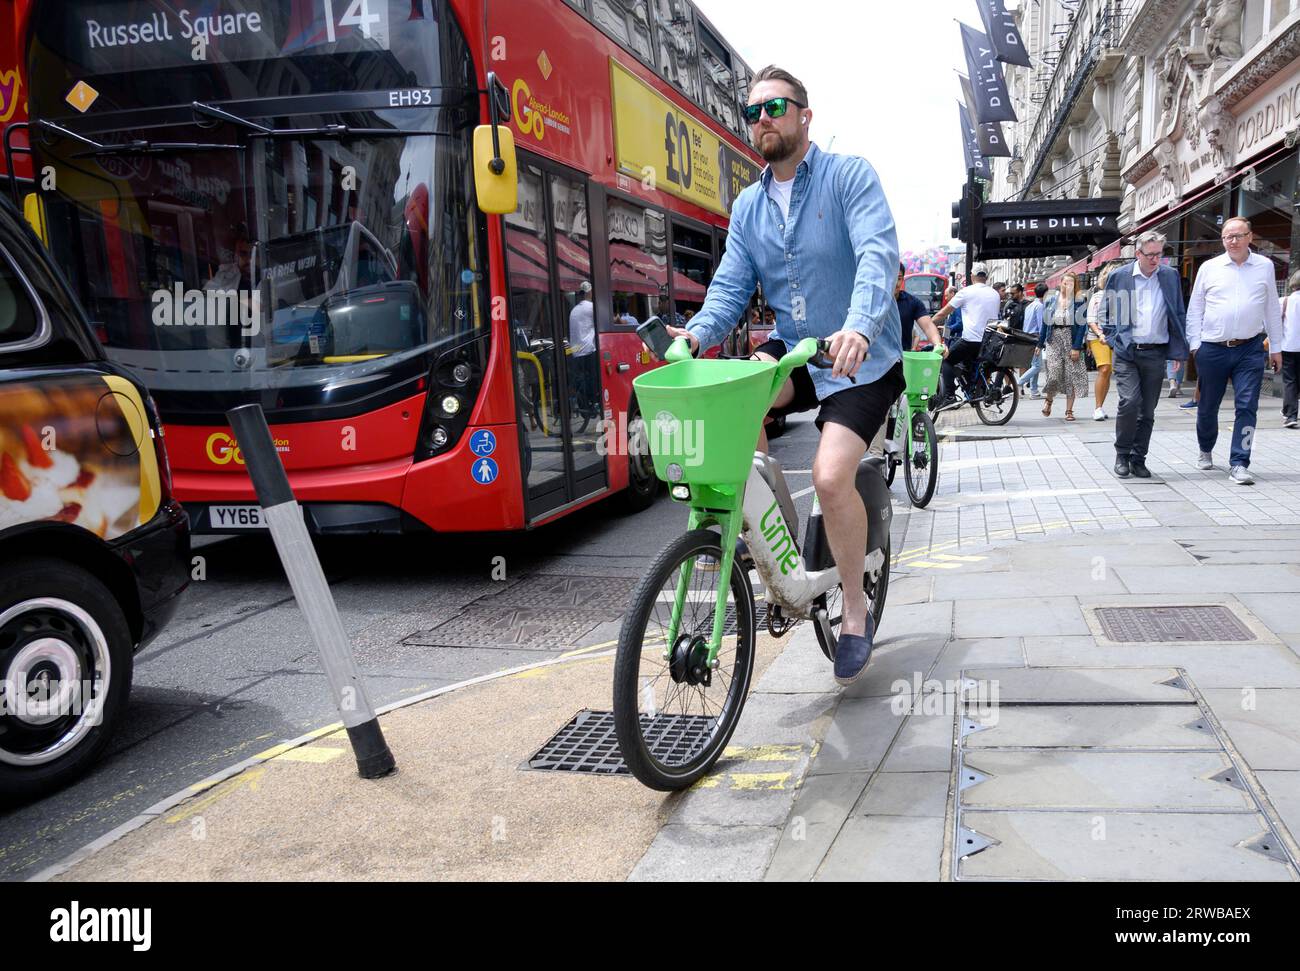 London, England, UK. Man cycling on the pavement in Piccadilly on a Lime rental bike Stock Photo